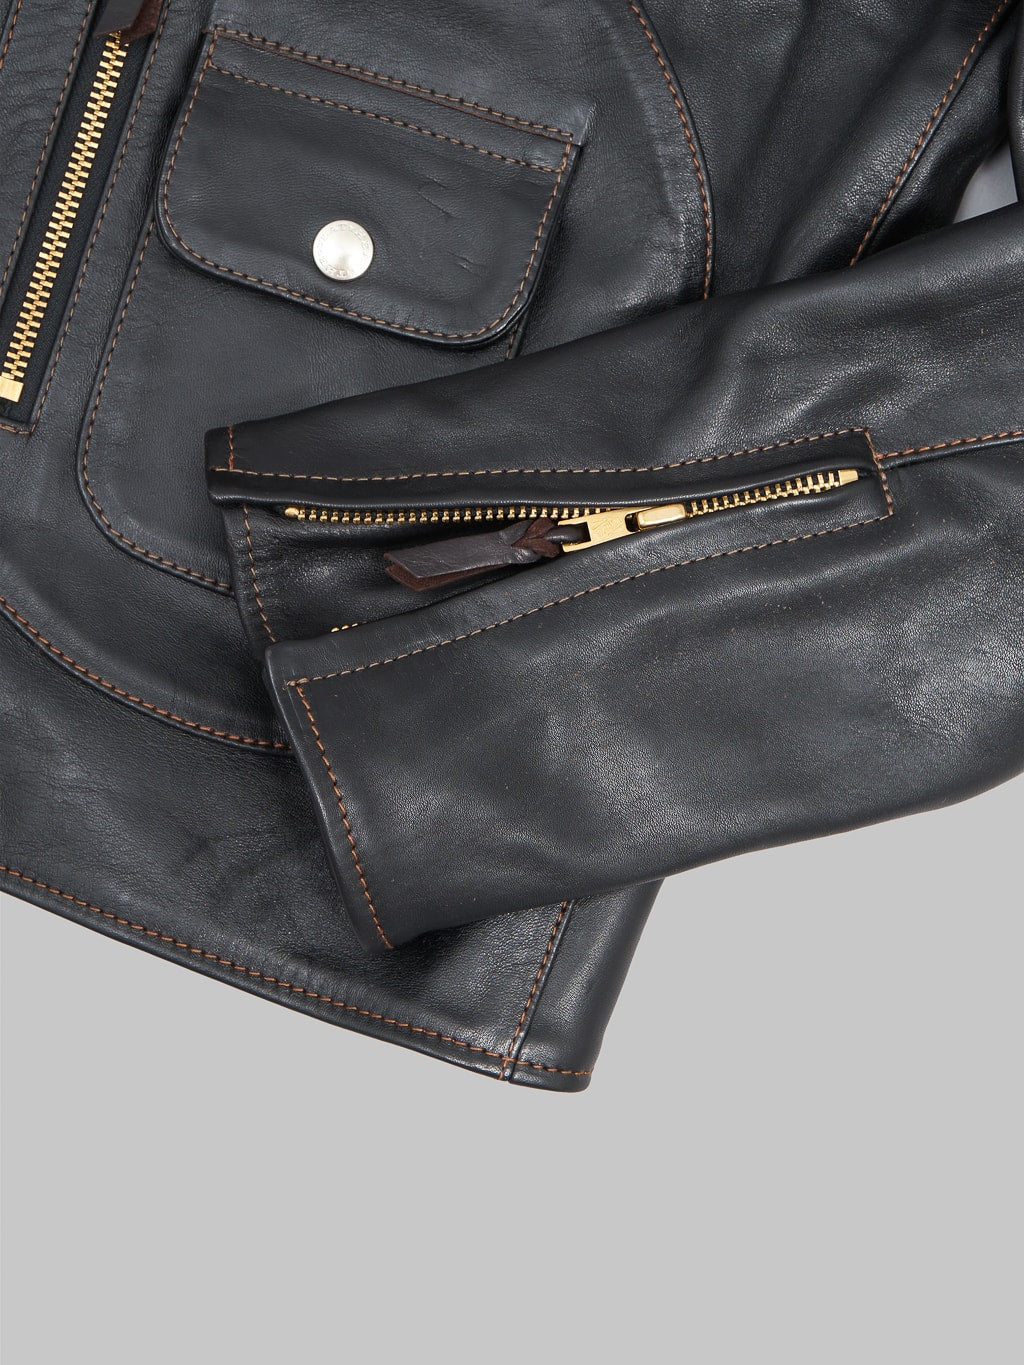 The Flat Head Horsehide Double Riders Jacket Black cuff details